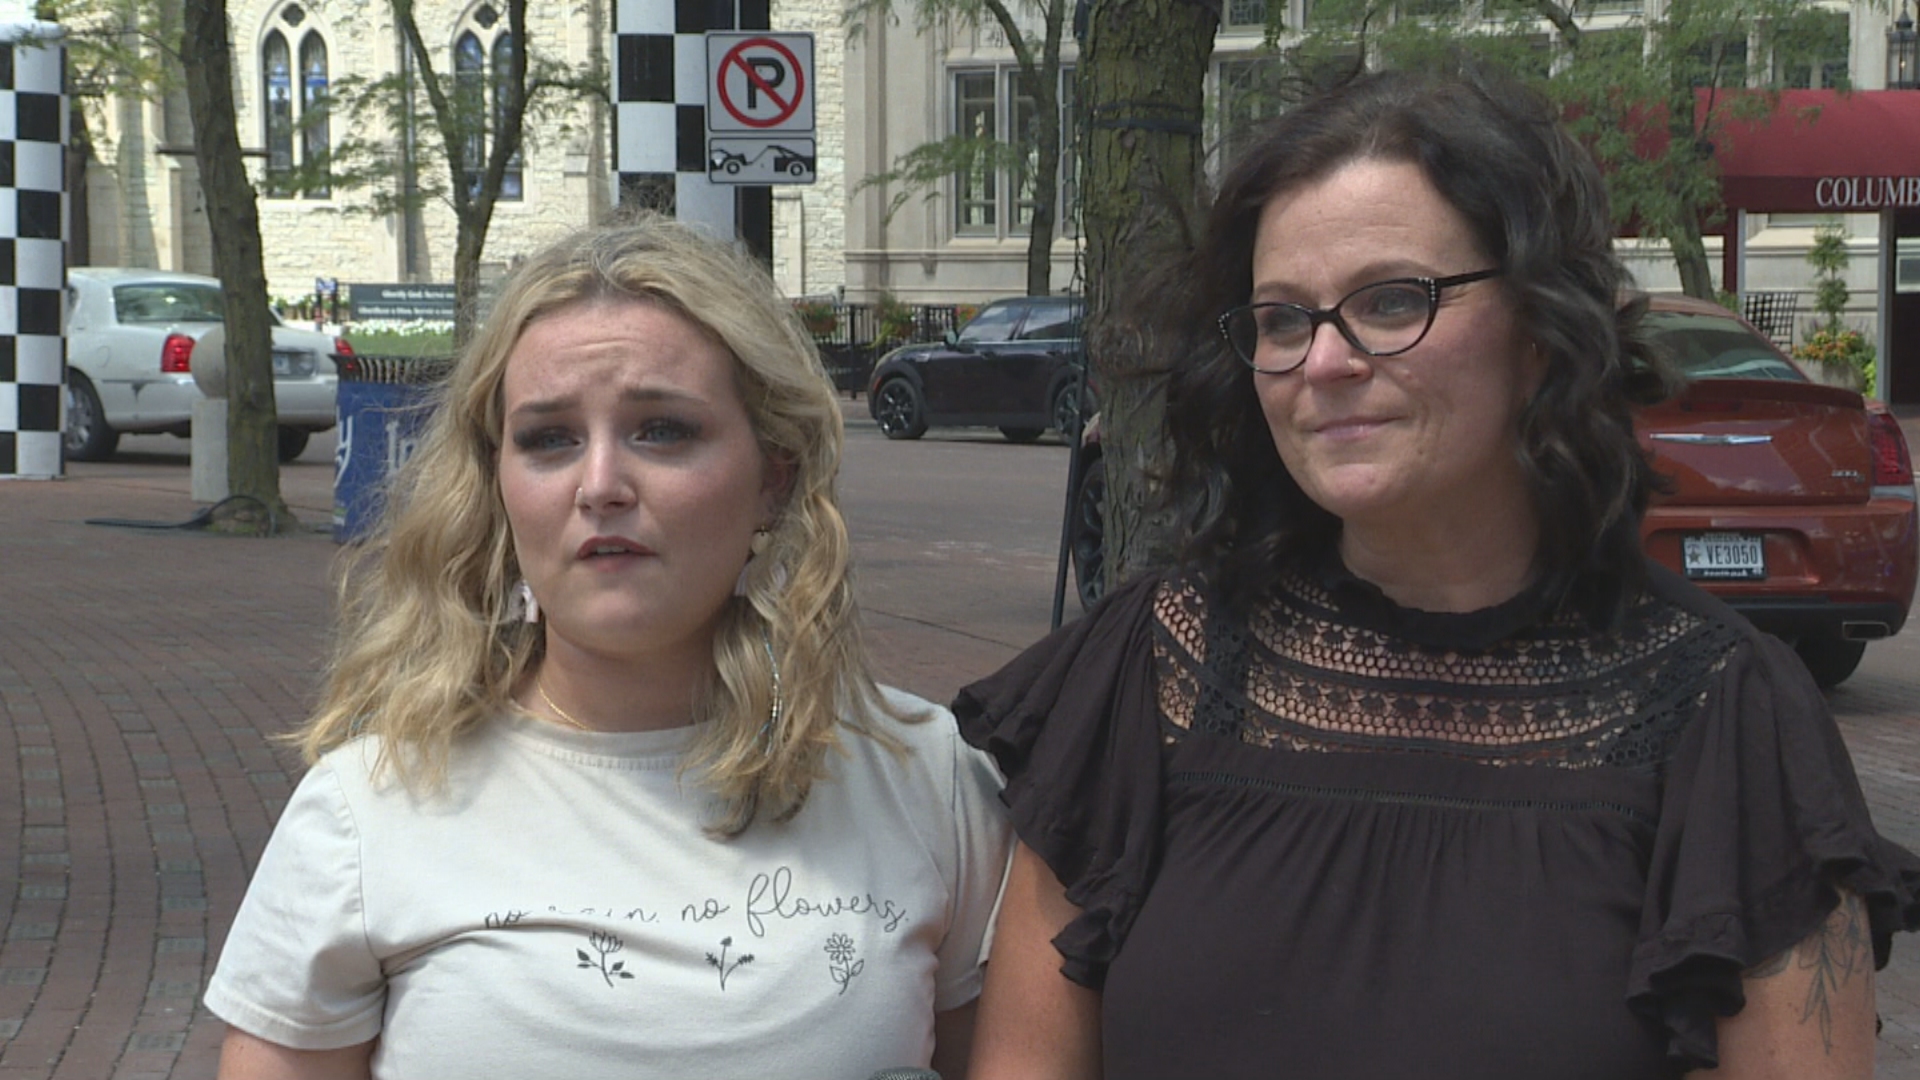 Greenwood woman, her mother thwart harassers in downtown Indianapolis